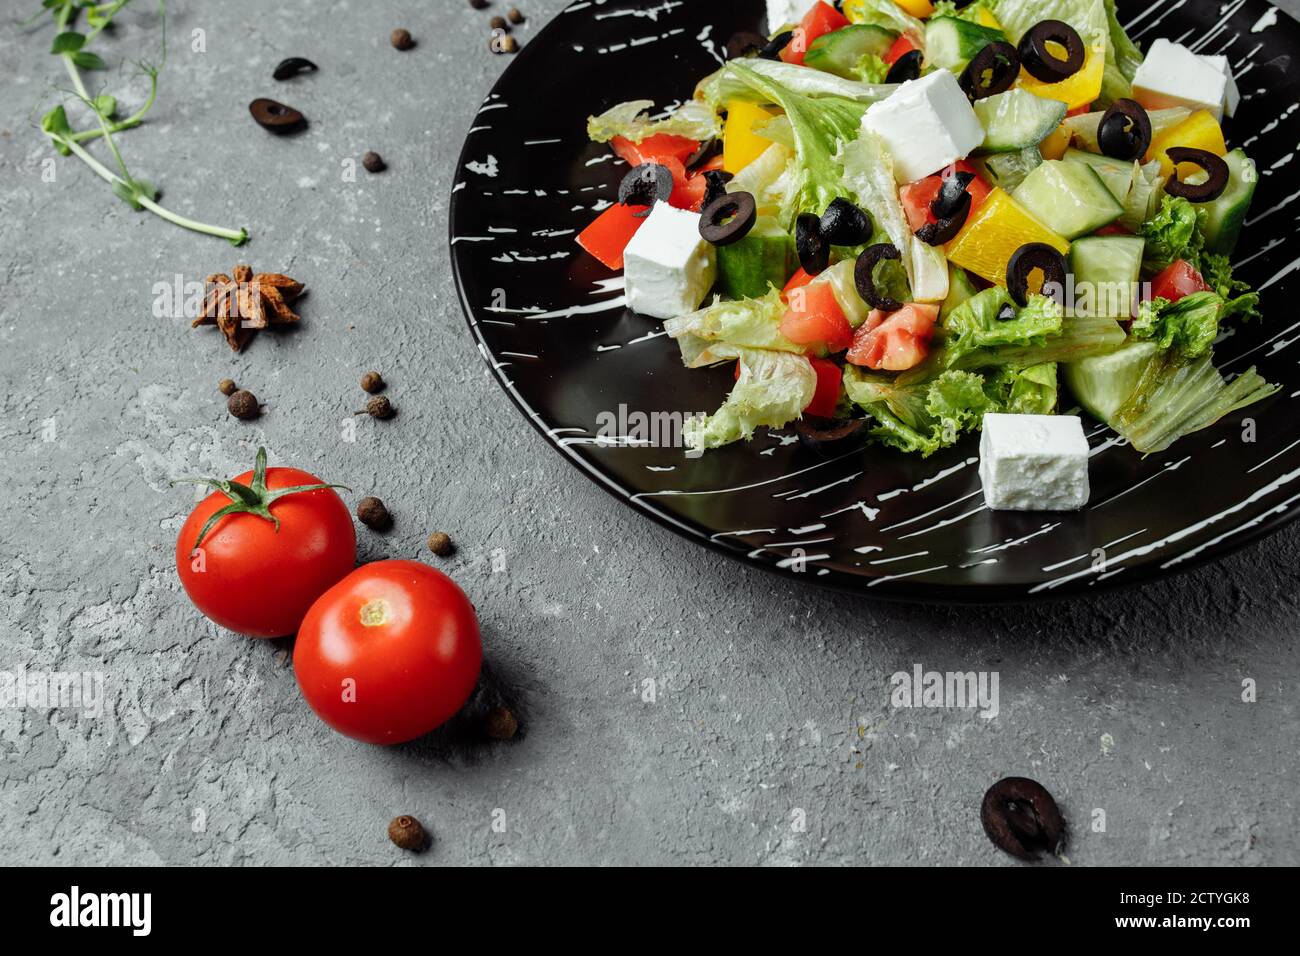 Greek Salad with Cucumeber, Kalamata Olives, Feta Cheese, Juicy Cherry Tomatoes and Fresh Basil. Concept for a tasty and healthy vegetarian meal Stock Photo